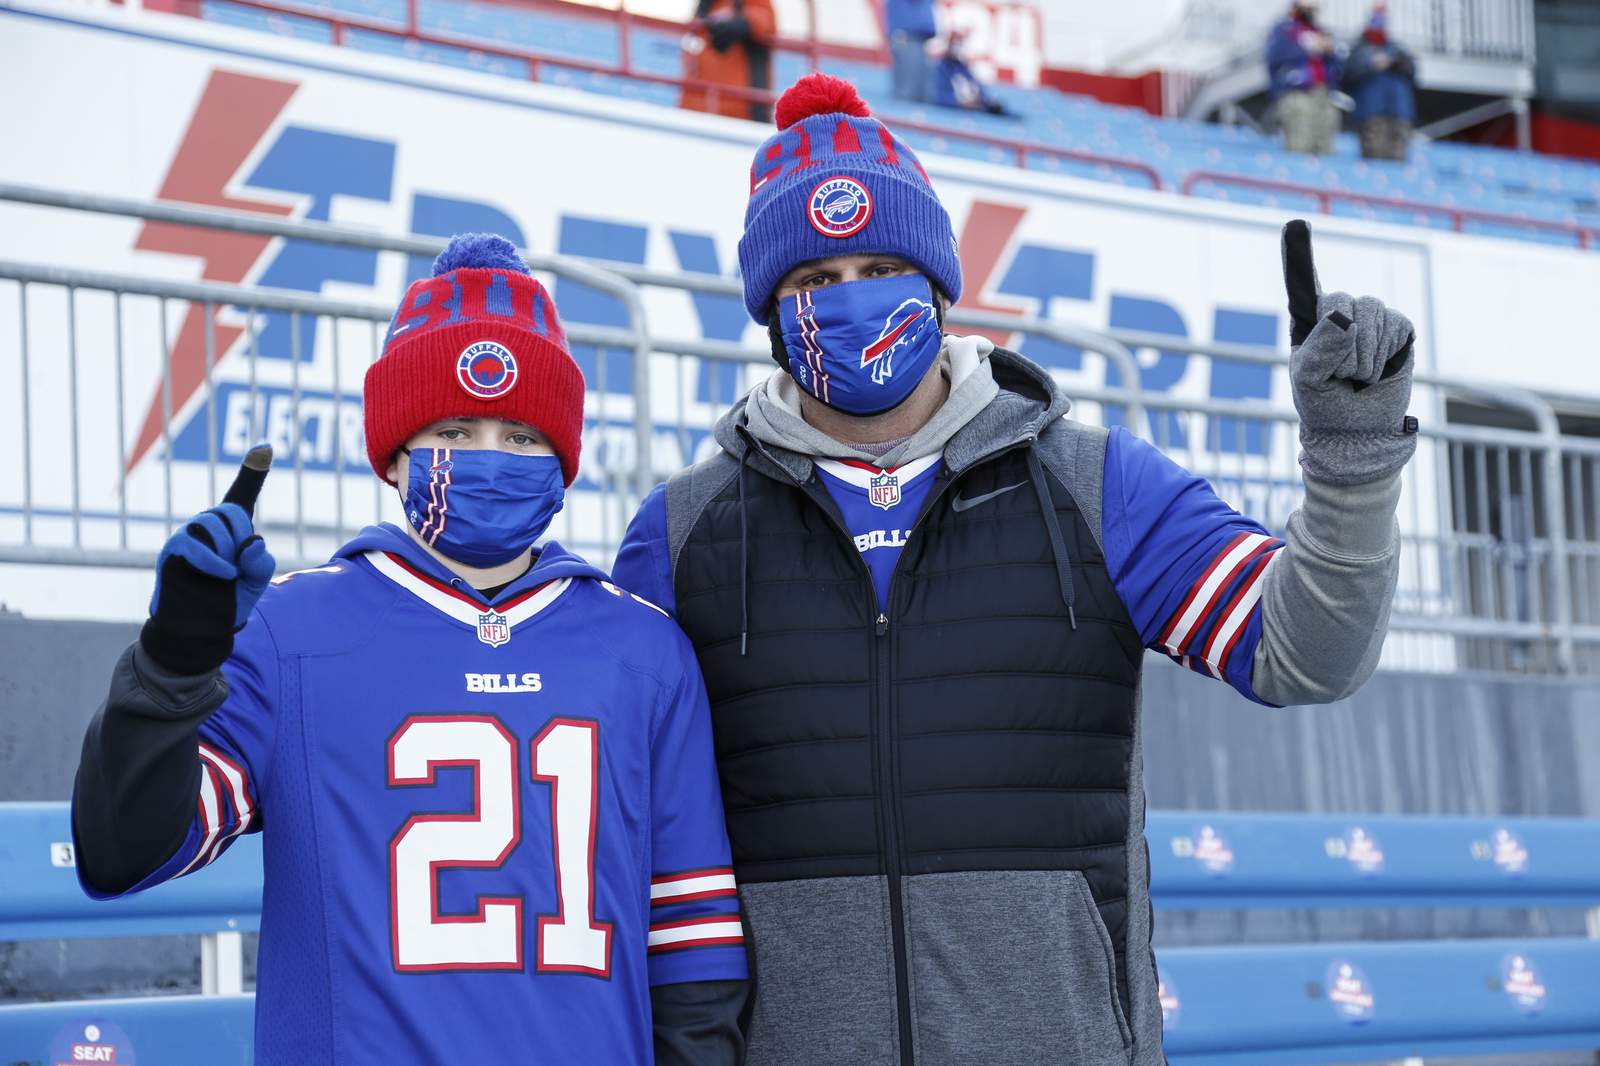 Lucky few Bills fans eager to cheer on team from stands